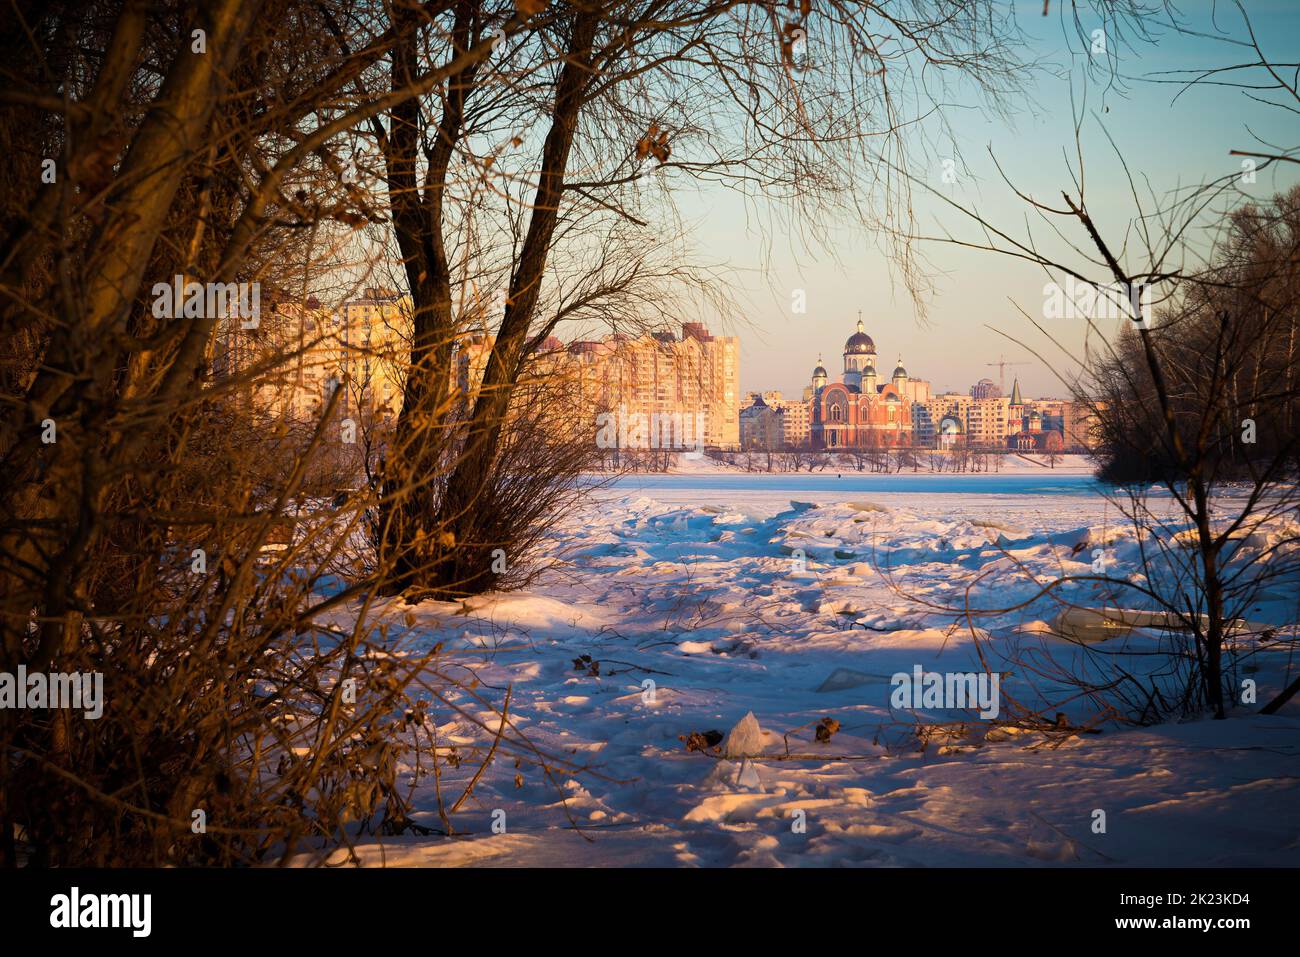 The modern Cathedral of Intercession of the Mother of God, with golden domes, close to the frozen Dnieper River at dawn Stock Photo